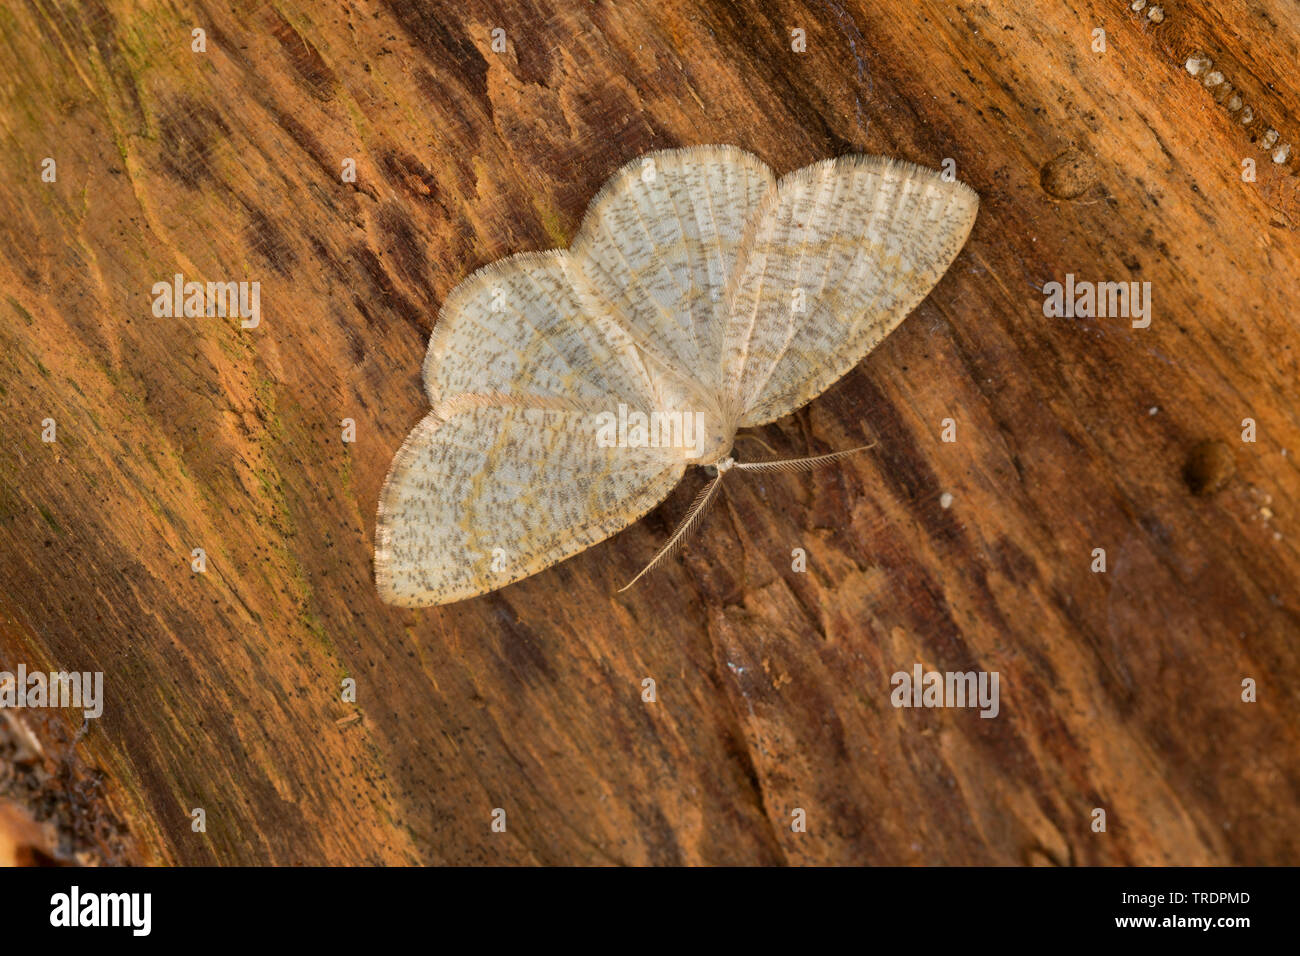 Common wave (Cabera exanthemata), sitting at dead wood, Germany Stock Photo